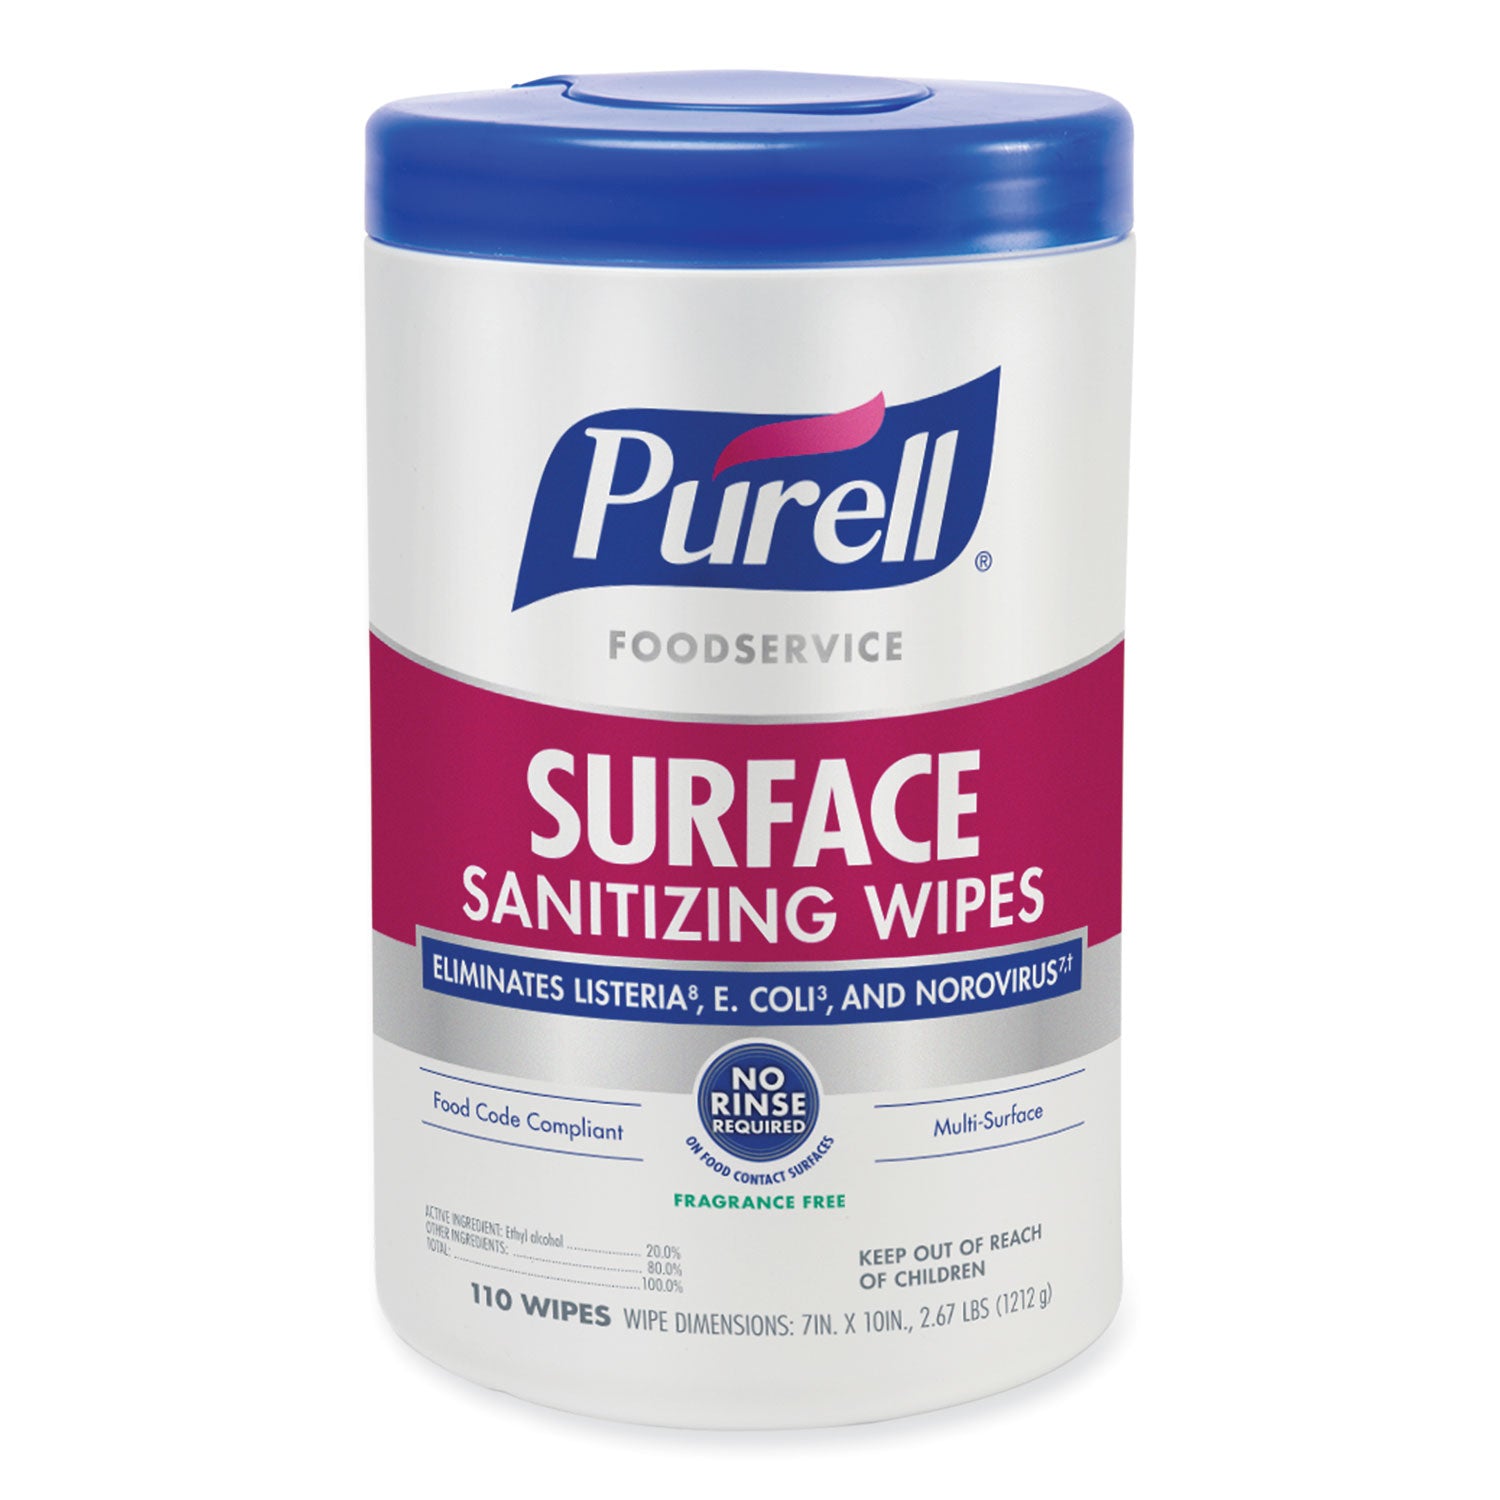 foodservice-surface-sanitizing-wipes-1-ply-10-x-7-fragrance-free-white-110-canister-6-canisters-carton_goj934106ct - 2